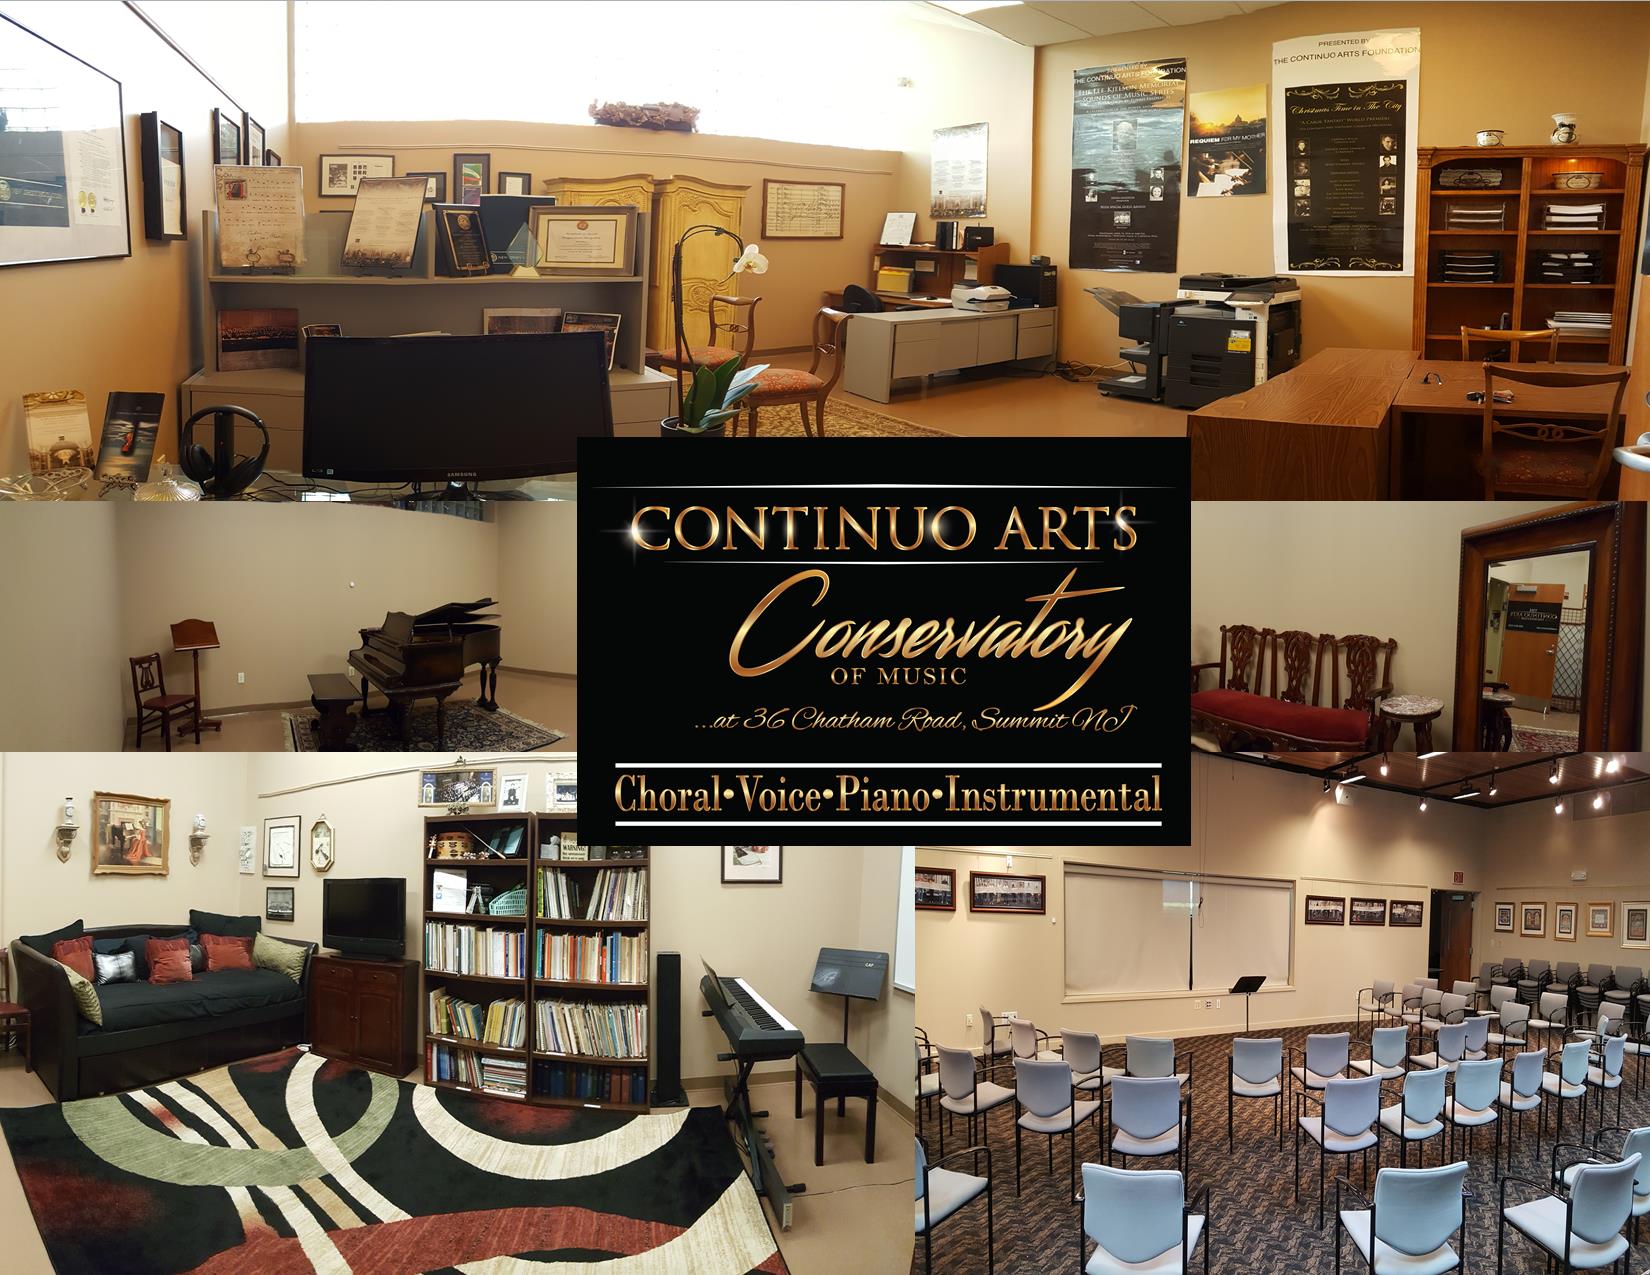 Continuo Arts Conservatory